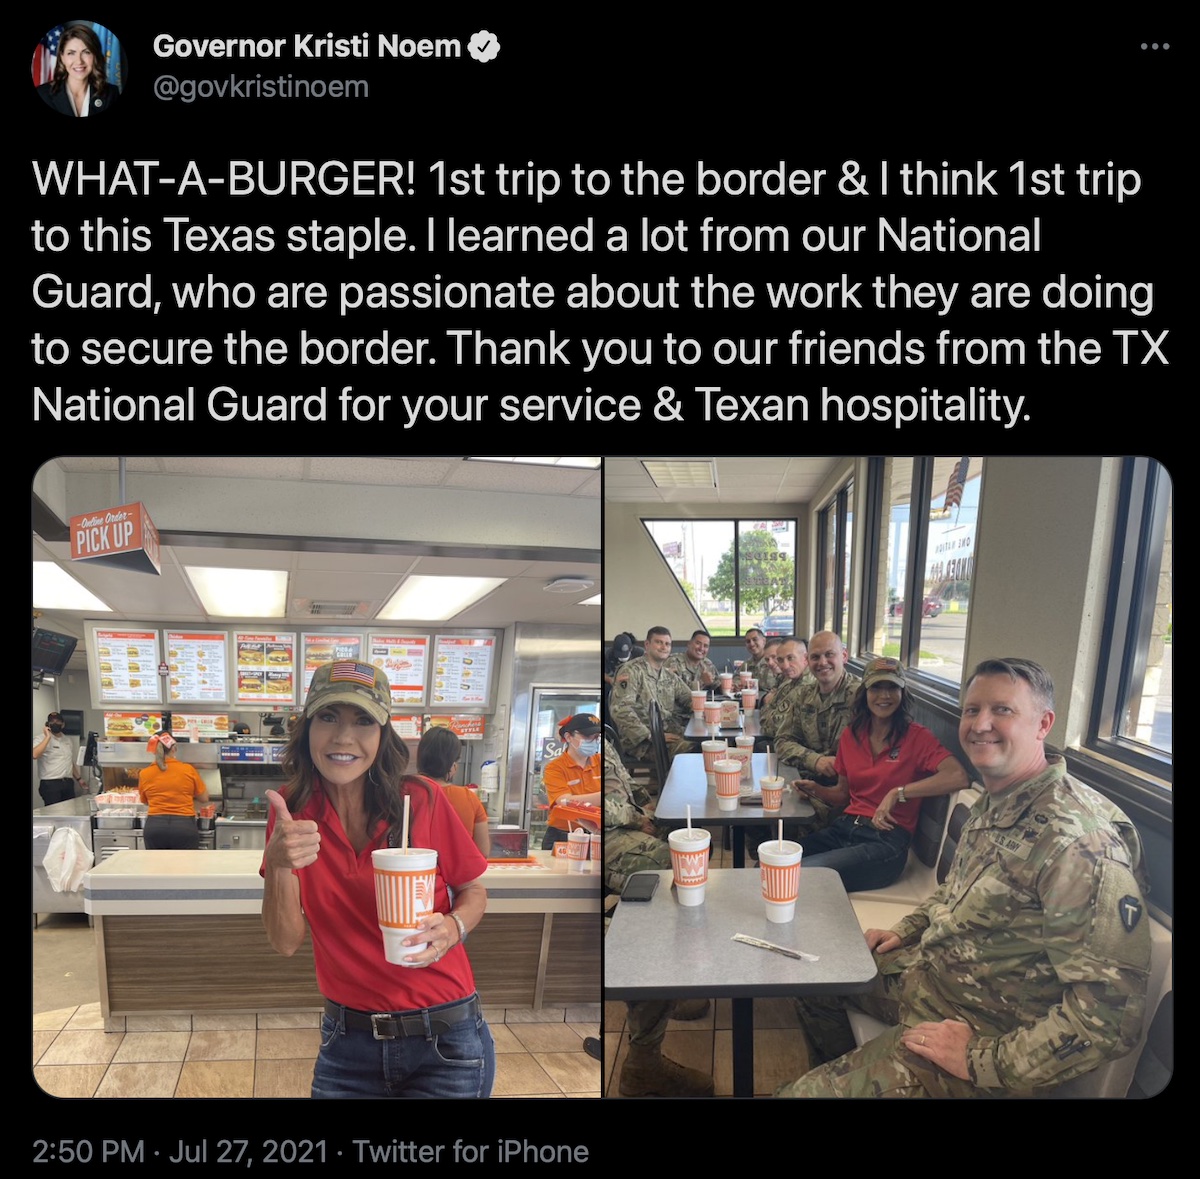 Gov. Kristi Noem, tweet from Texas What-a-Burger with South Dakota National Guard, posted 2021.07.27.